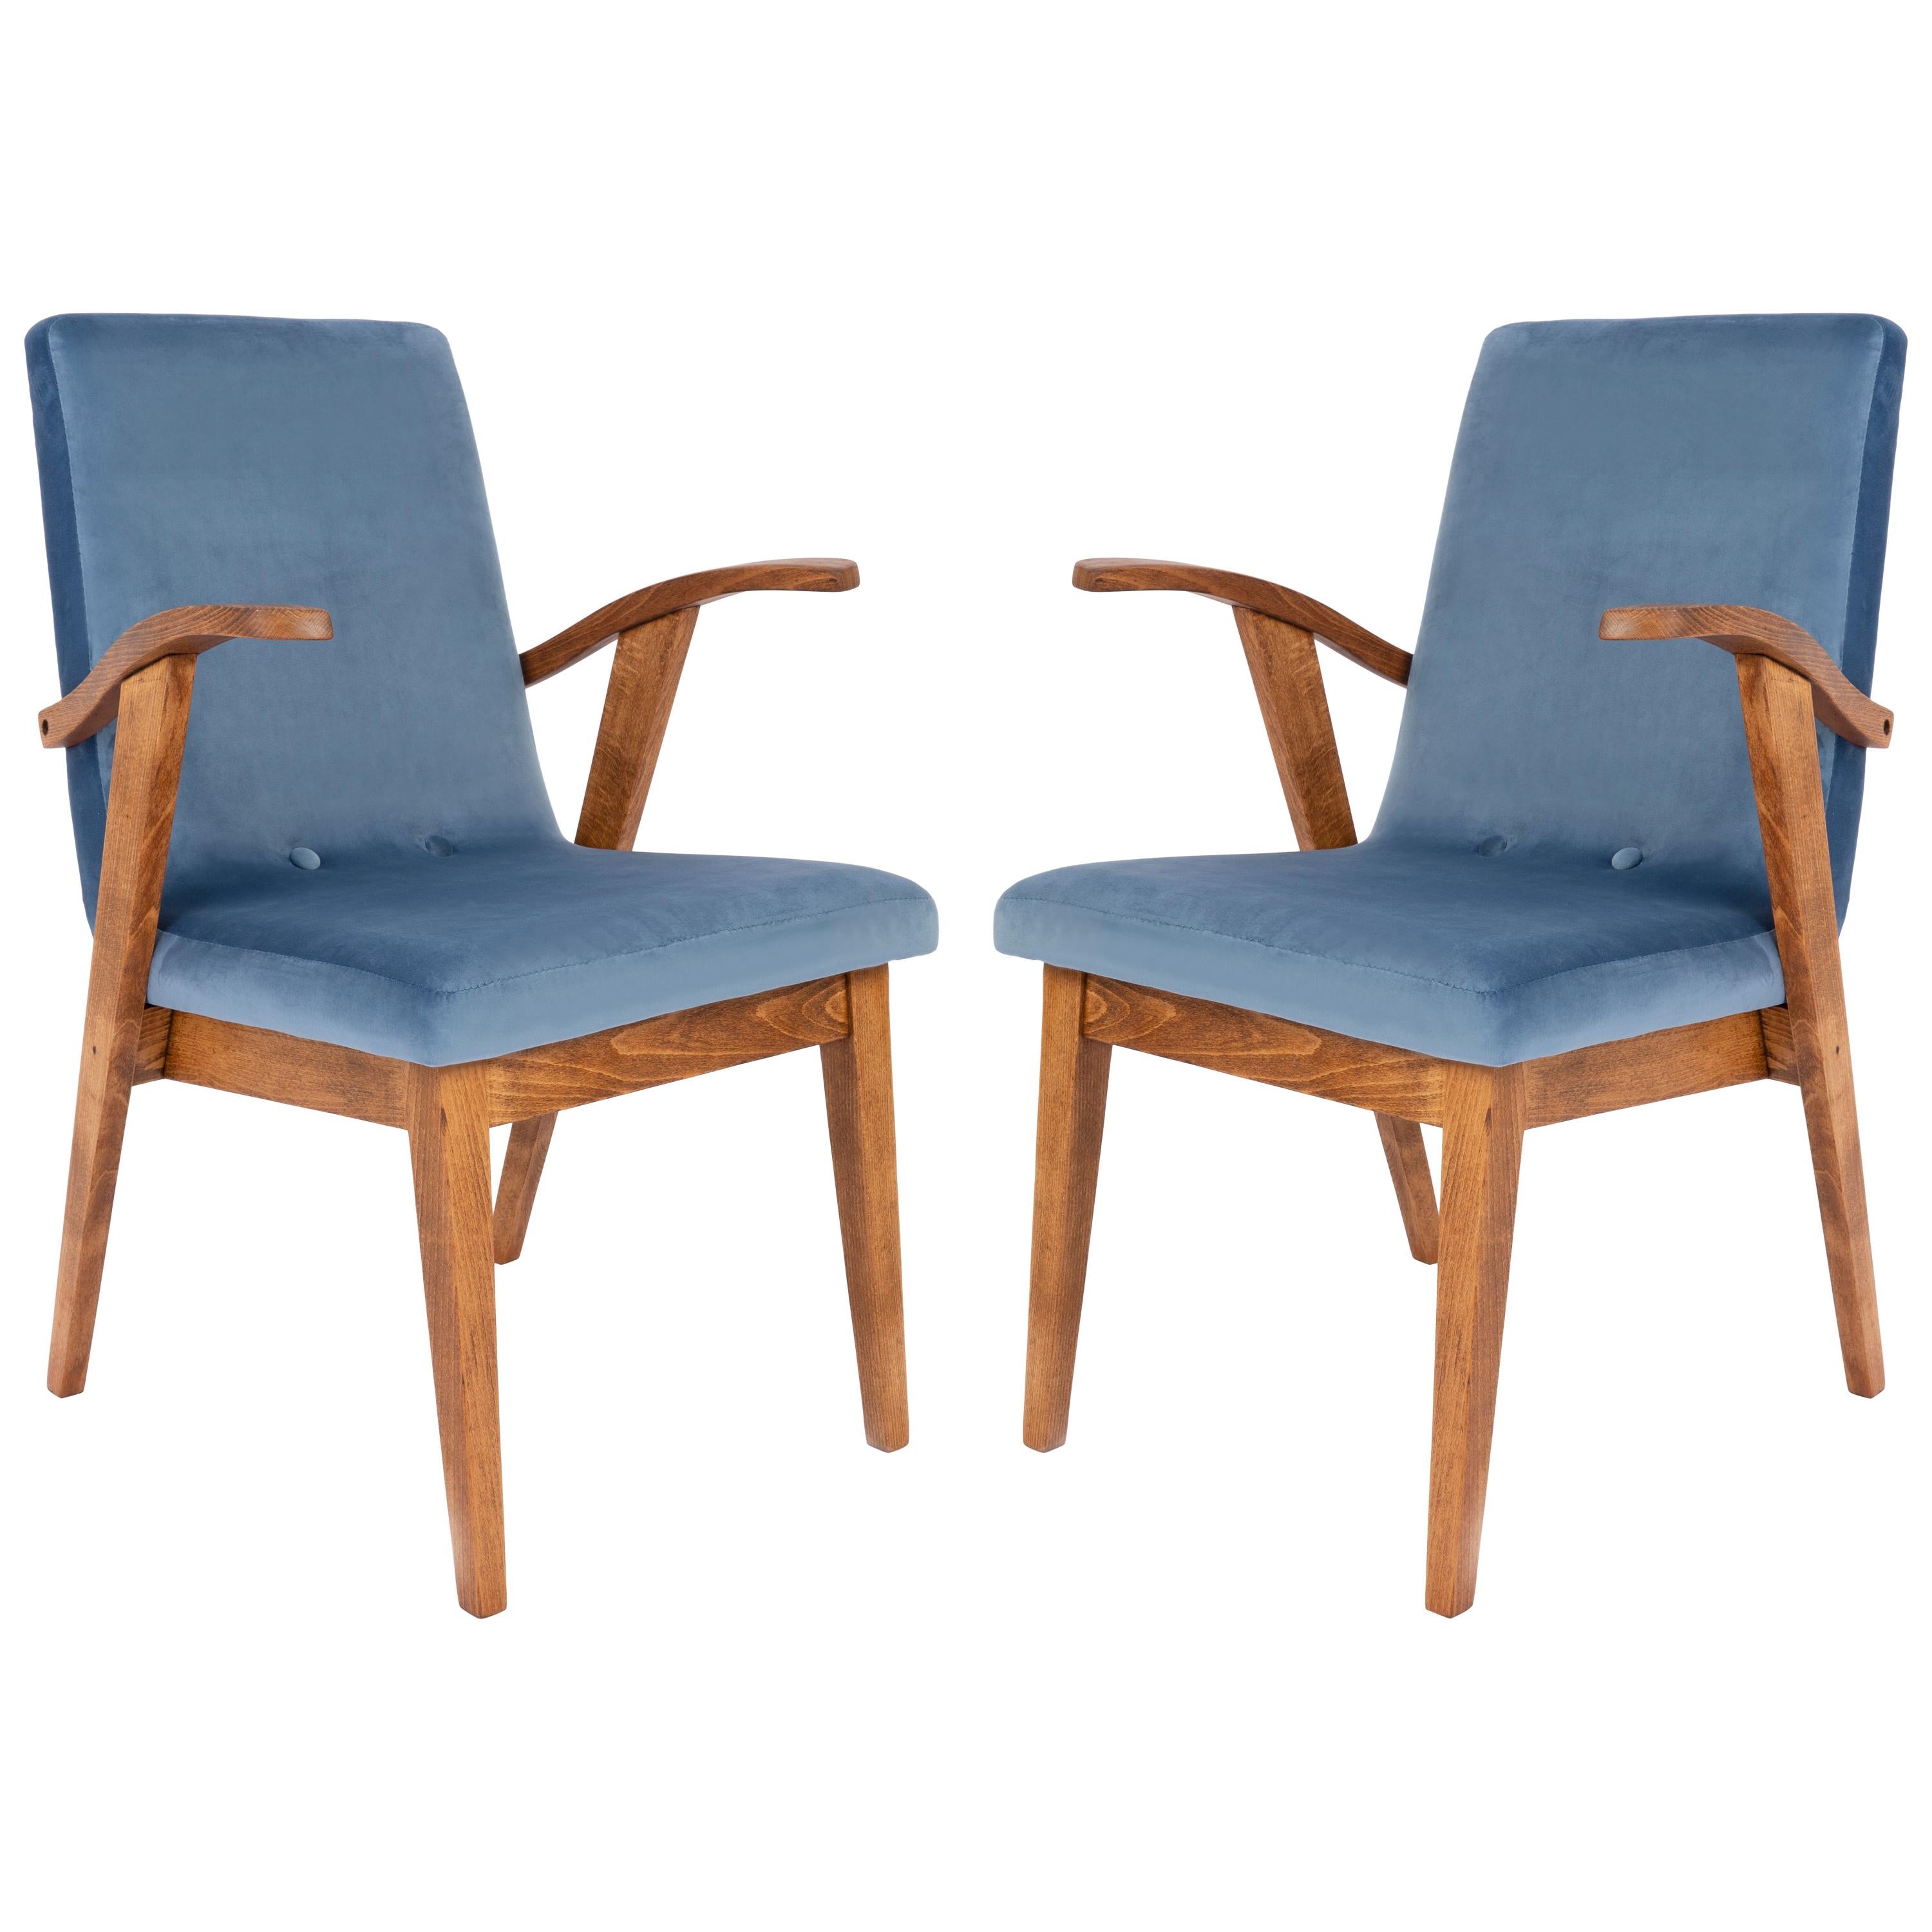 Pair of 20th Century Vintage Blue Chairs by Mieczyslaw Puchala, 1960s